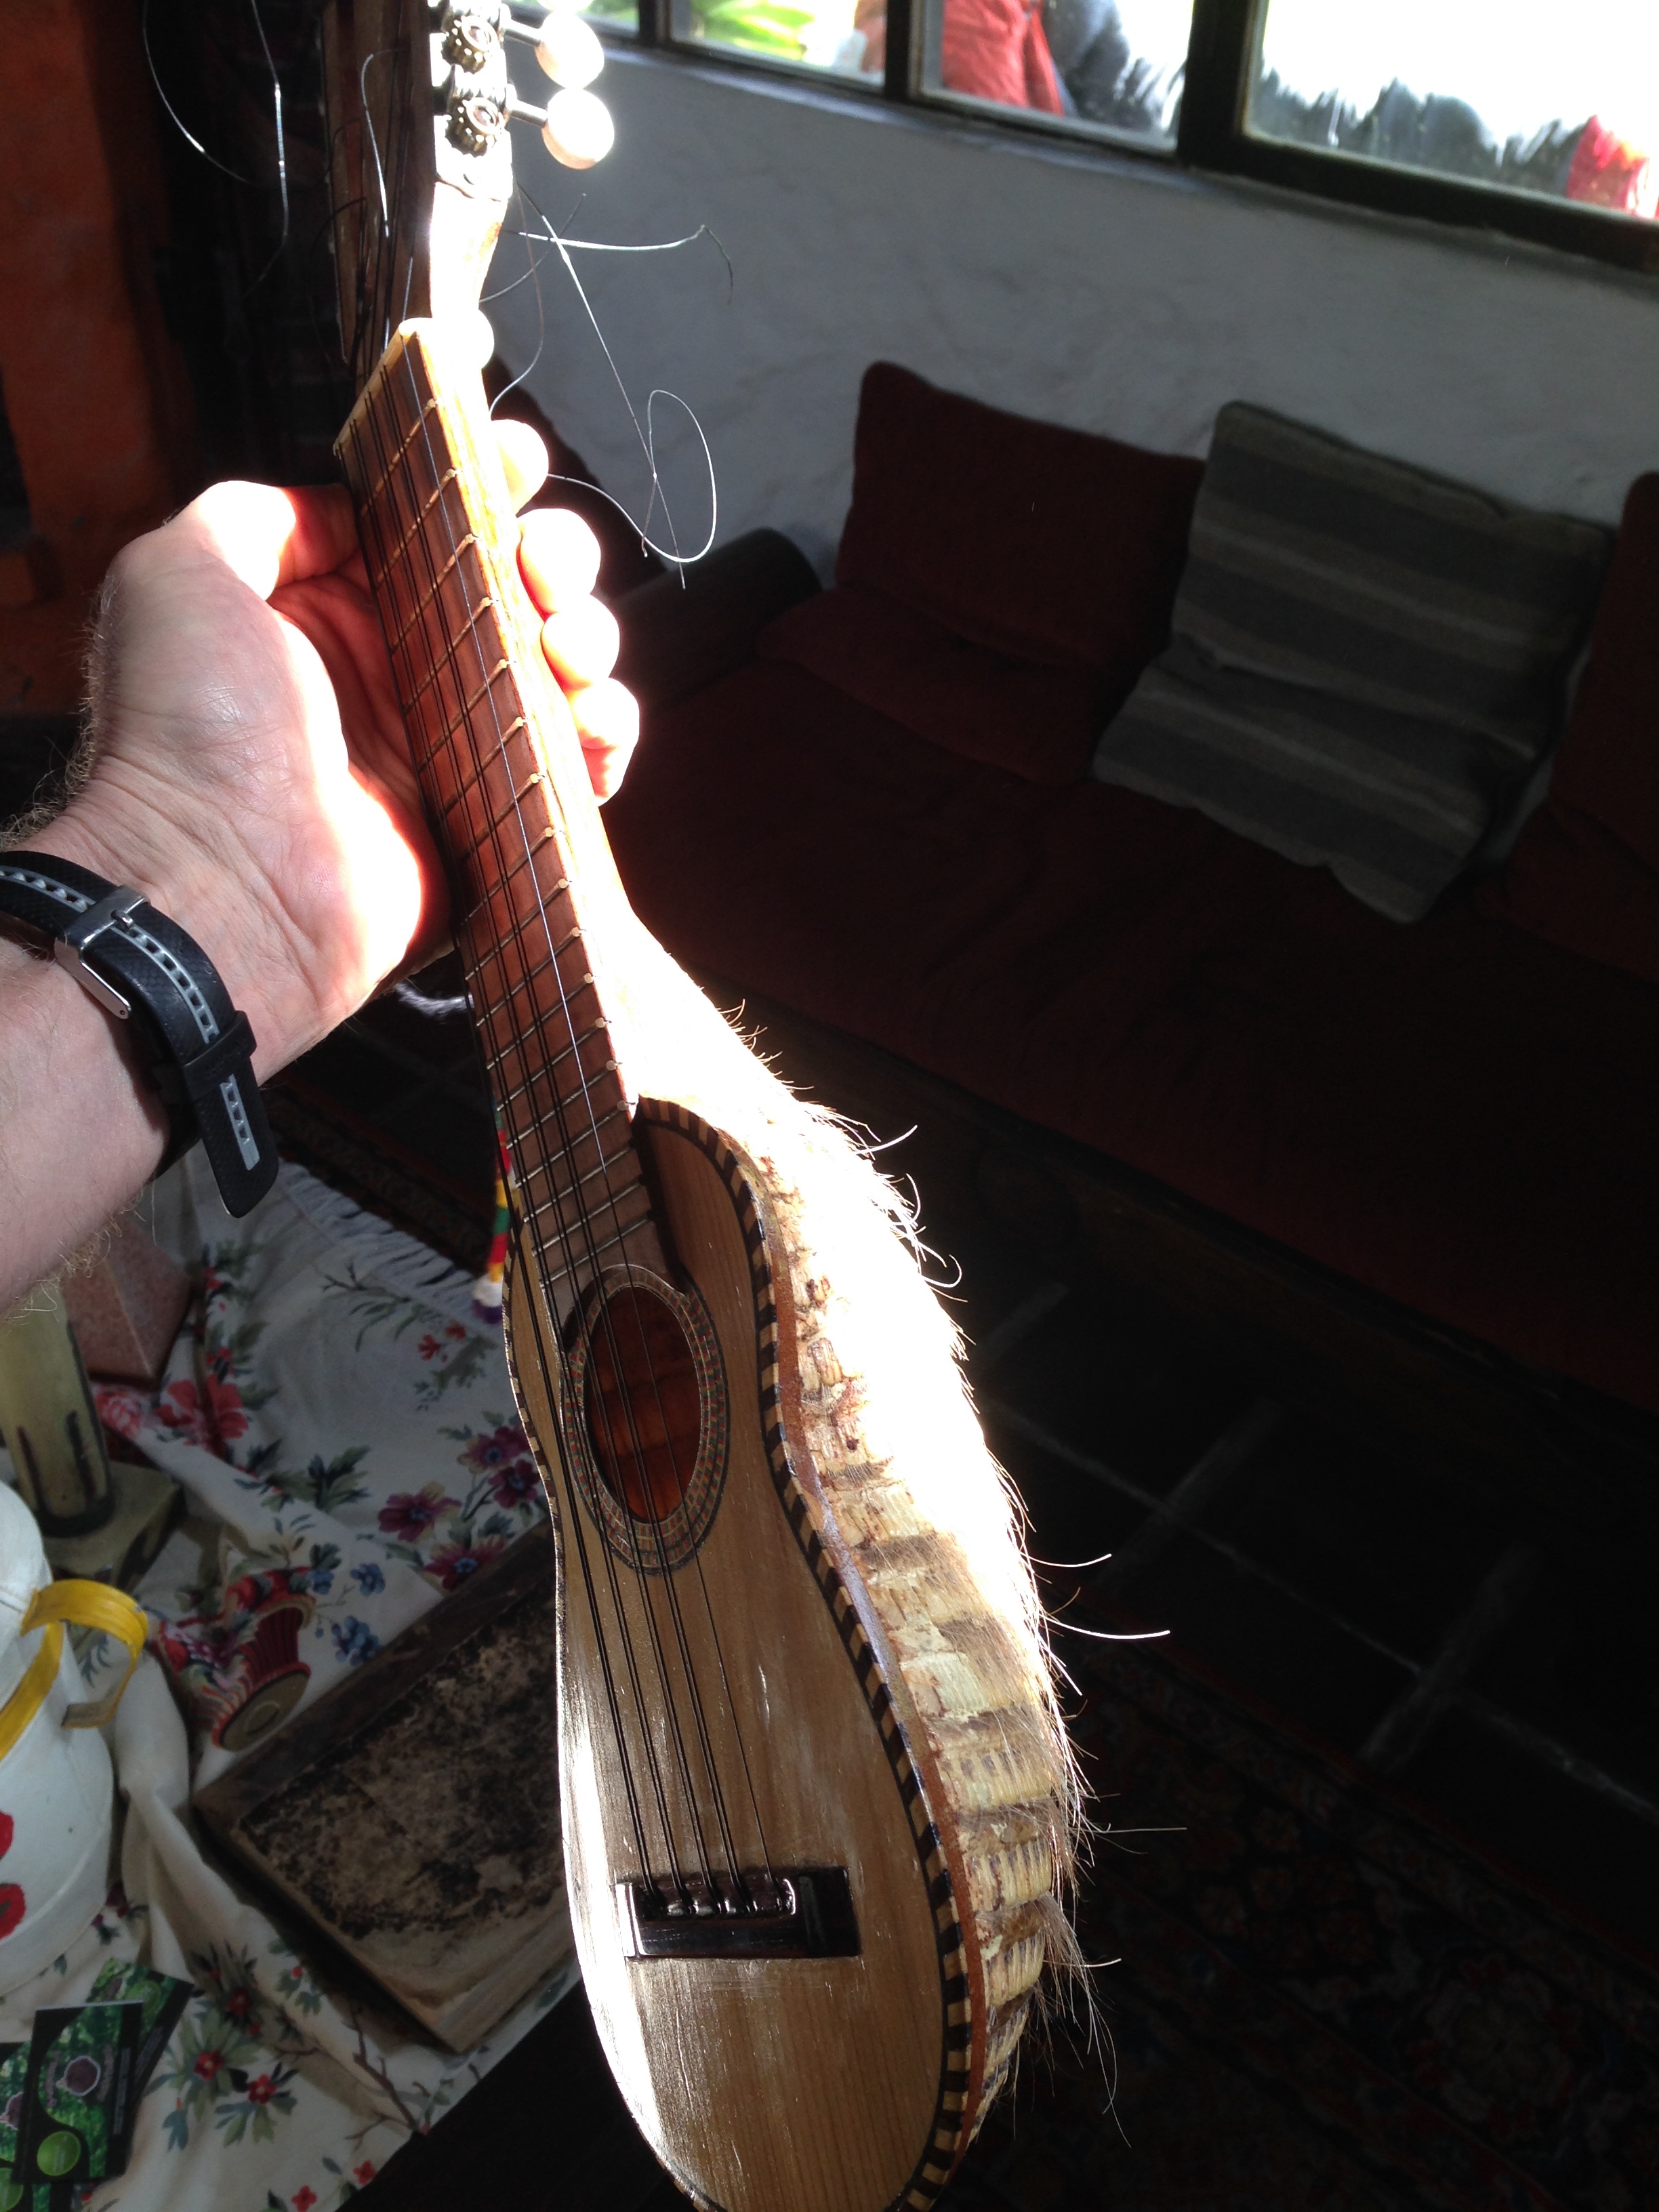 Charango: an instrument made from an armadillo’s shell.